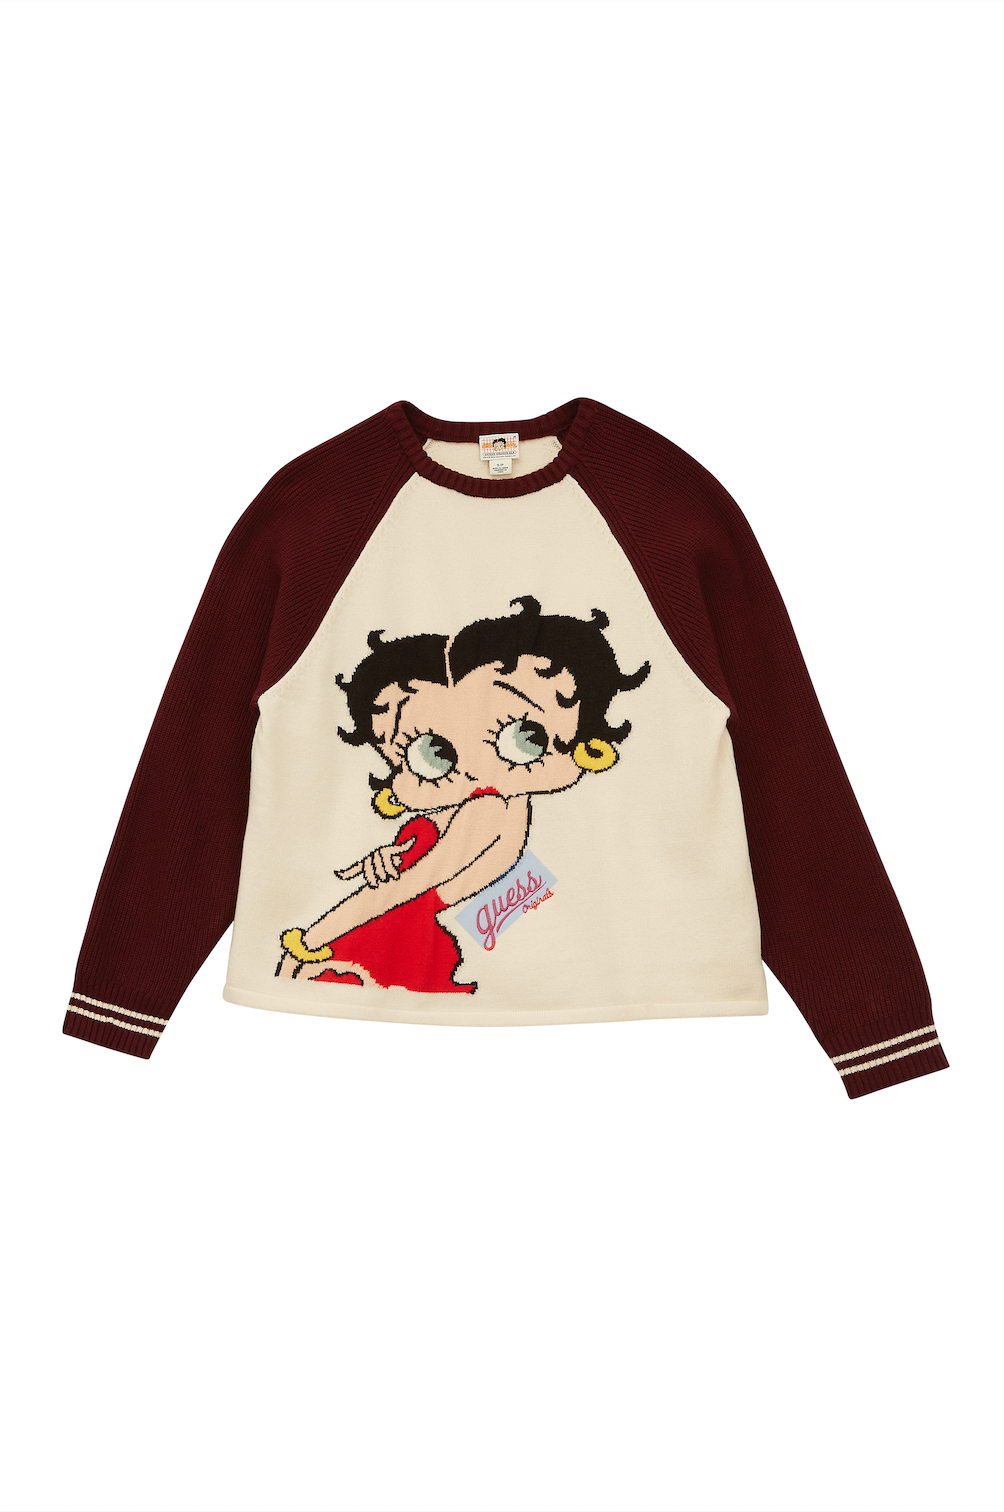 A sweater with an image of Betty Boop covering the torso